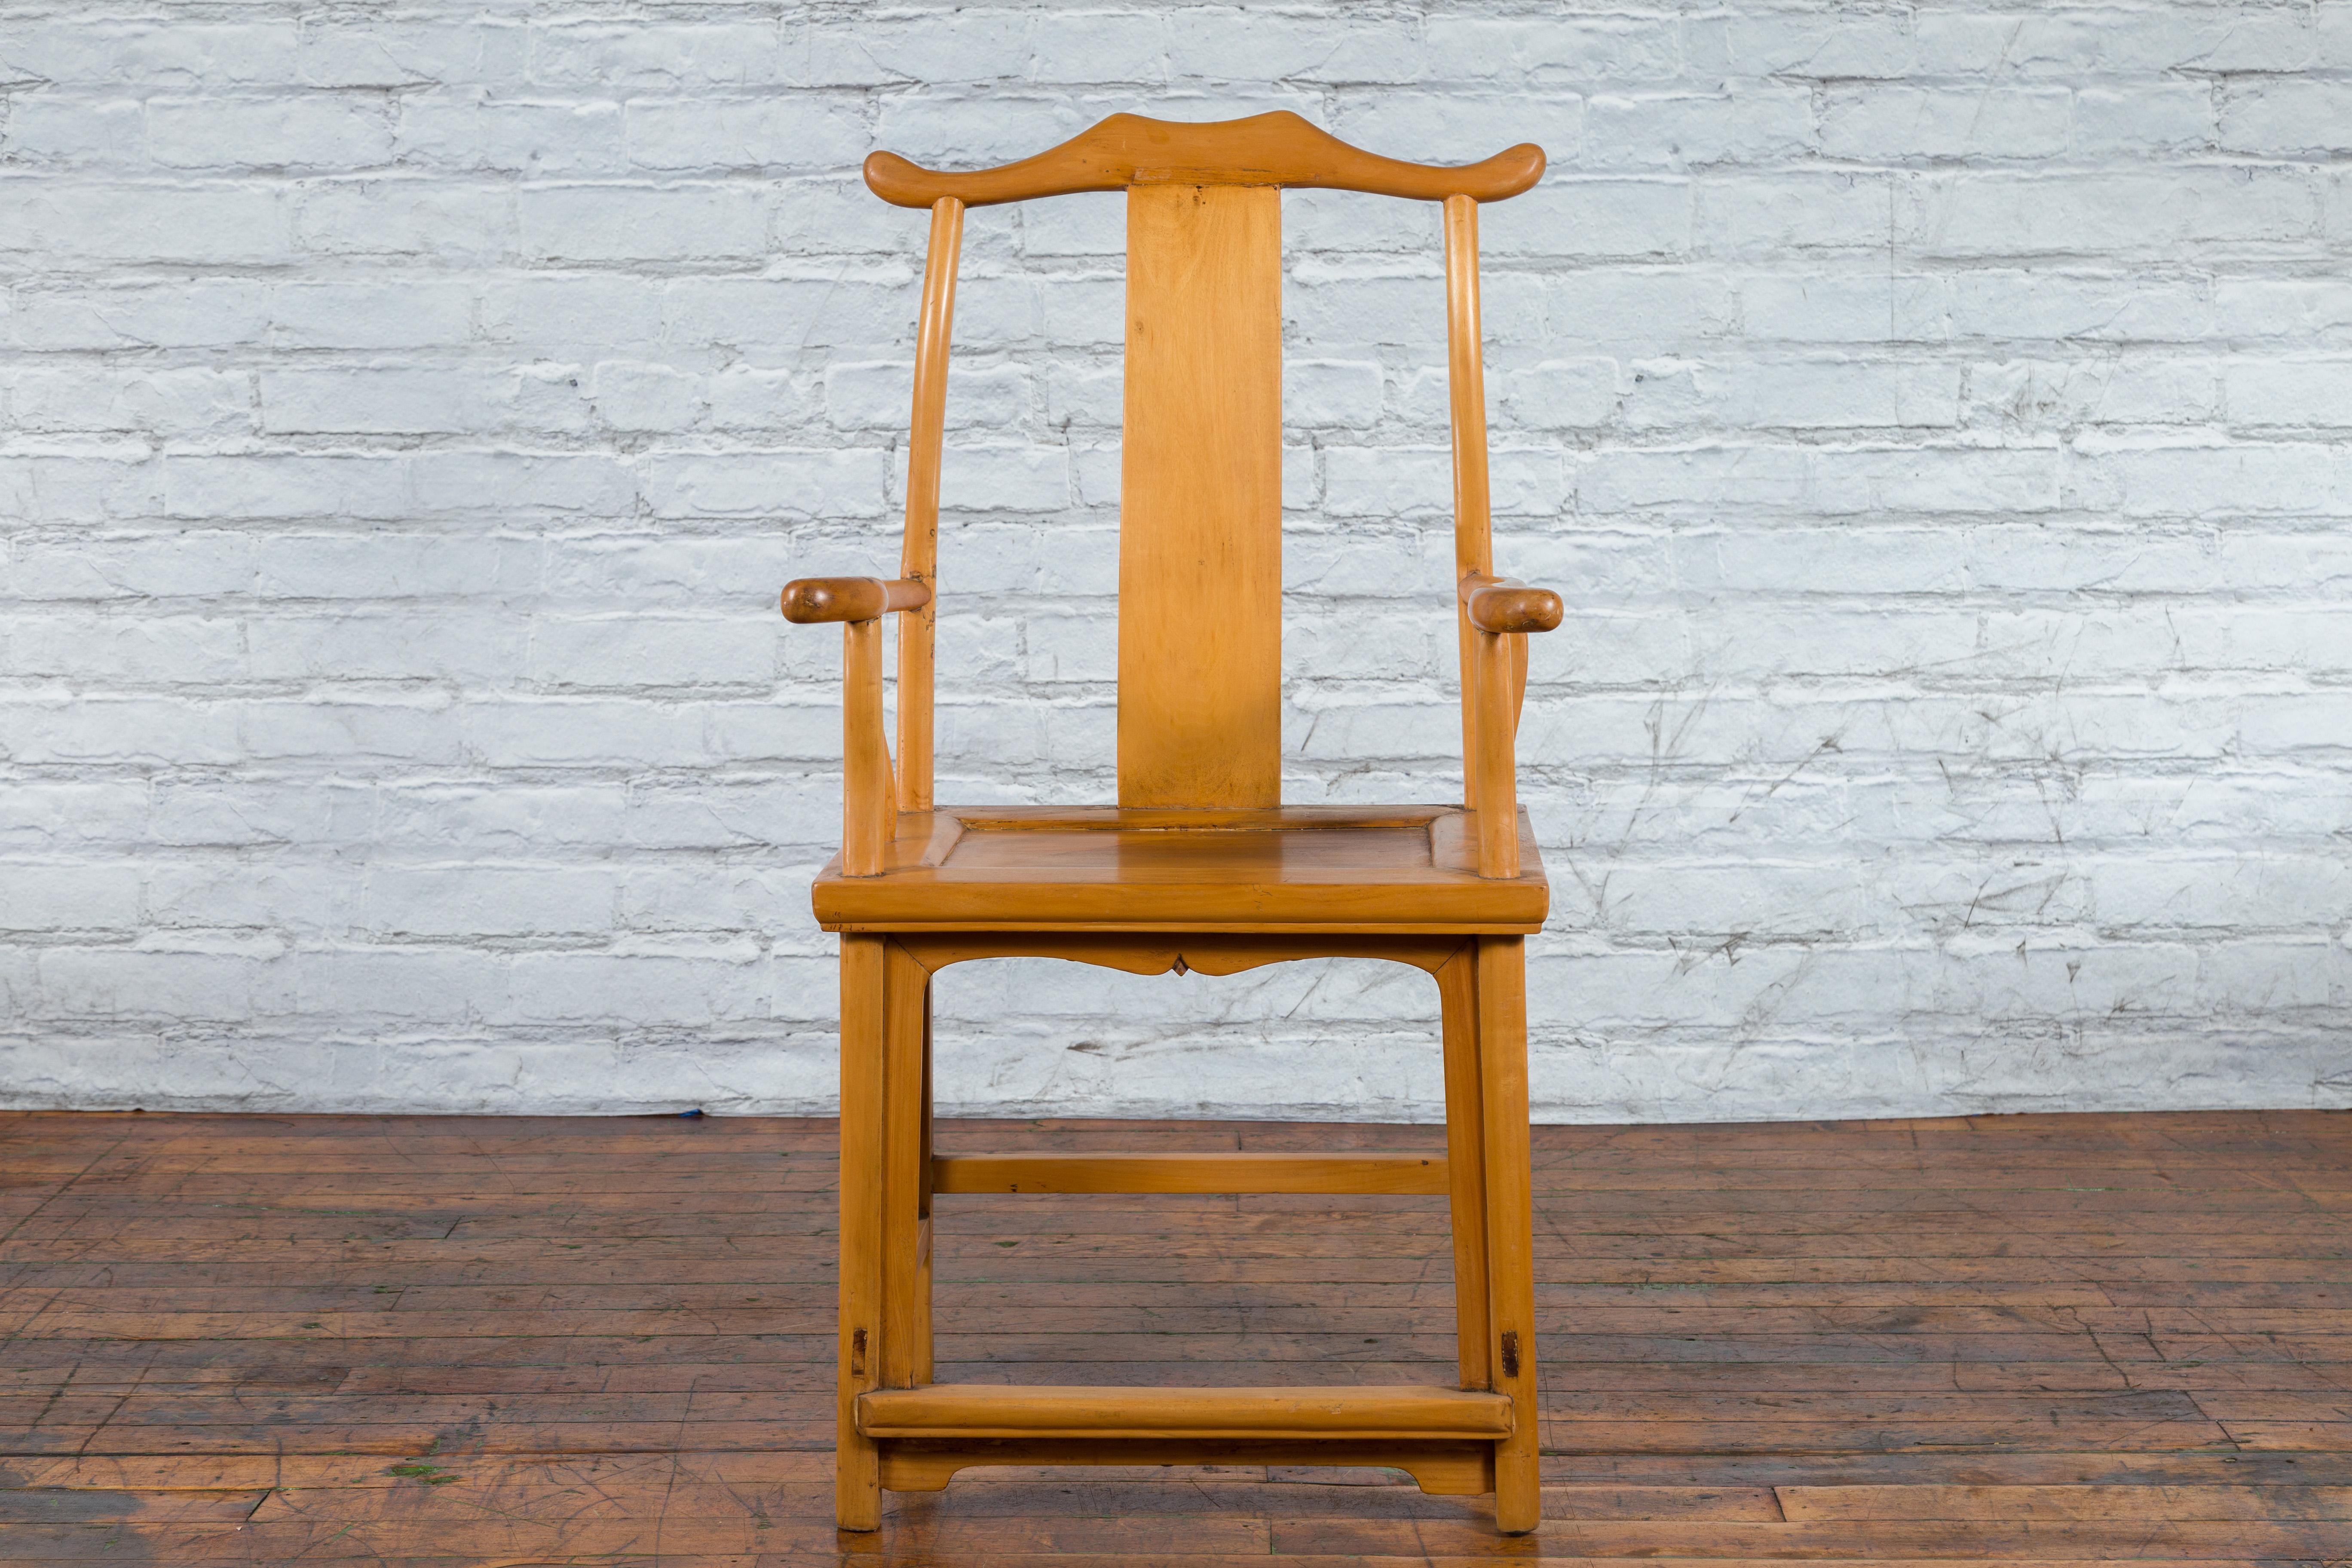 A Chinese Qing Dynasty period lamp hanger chair from the late 19th century, with serpentine arms, wooden seat and natural patina. Created in China during the later part of the Qing dynasty period in the late 19th century, this scholar's lamp-hanger